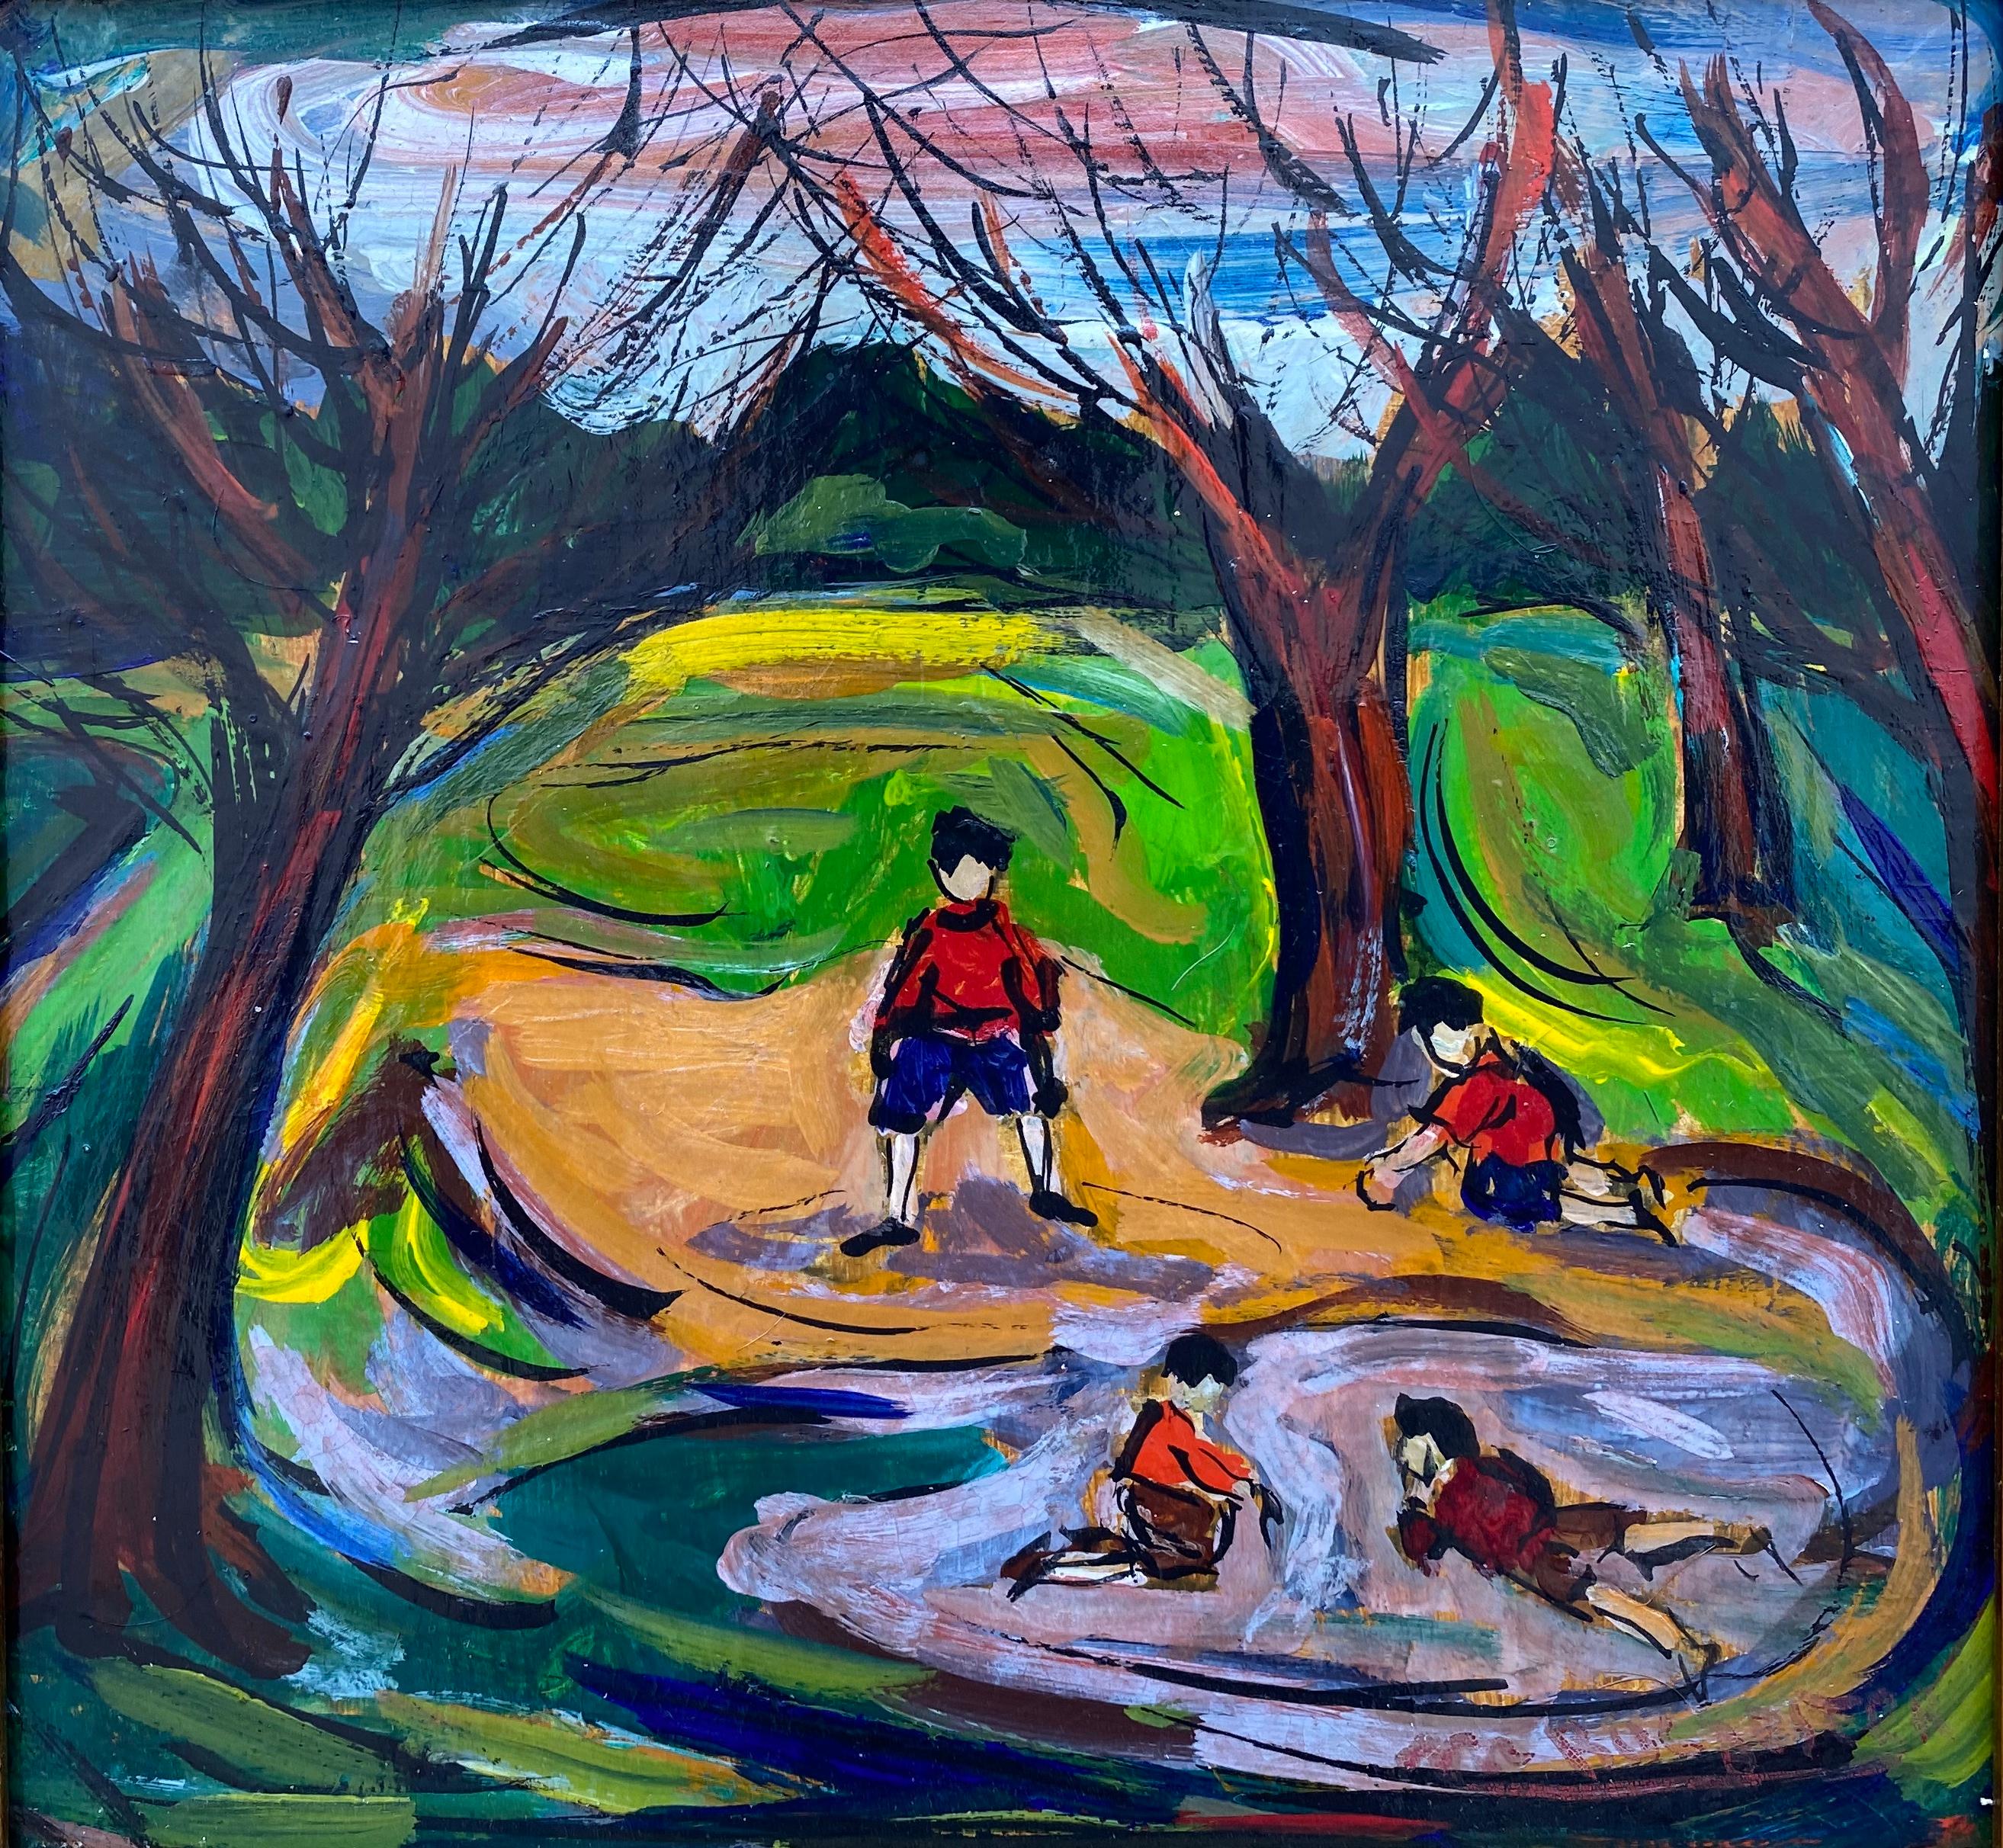 Maxim Bugzester Figurative Painting - “Boys in the Park”